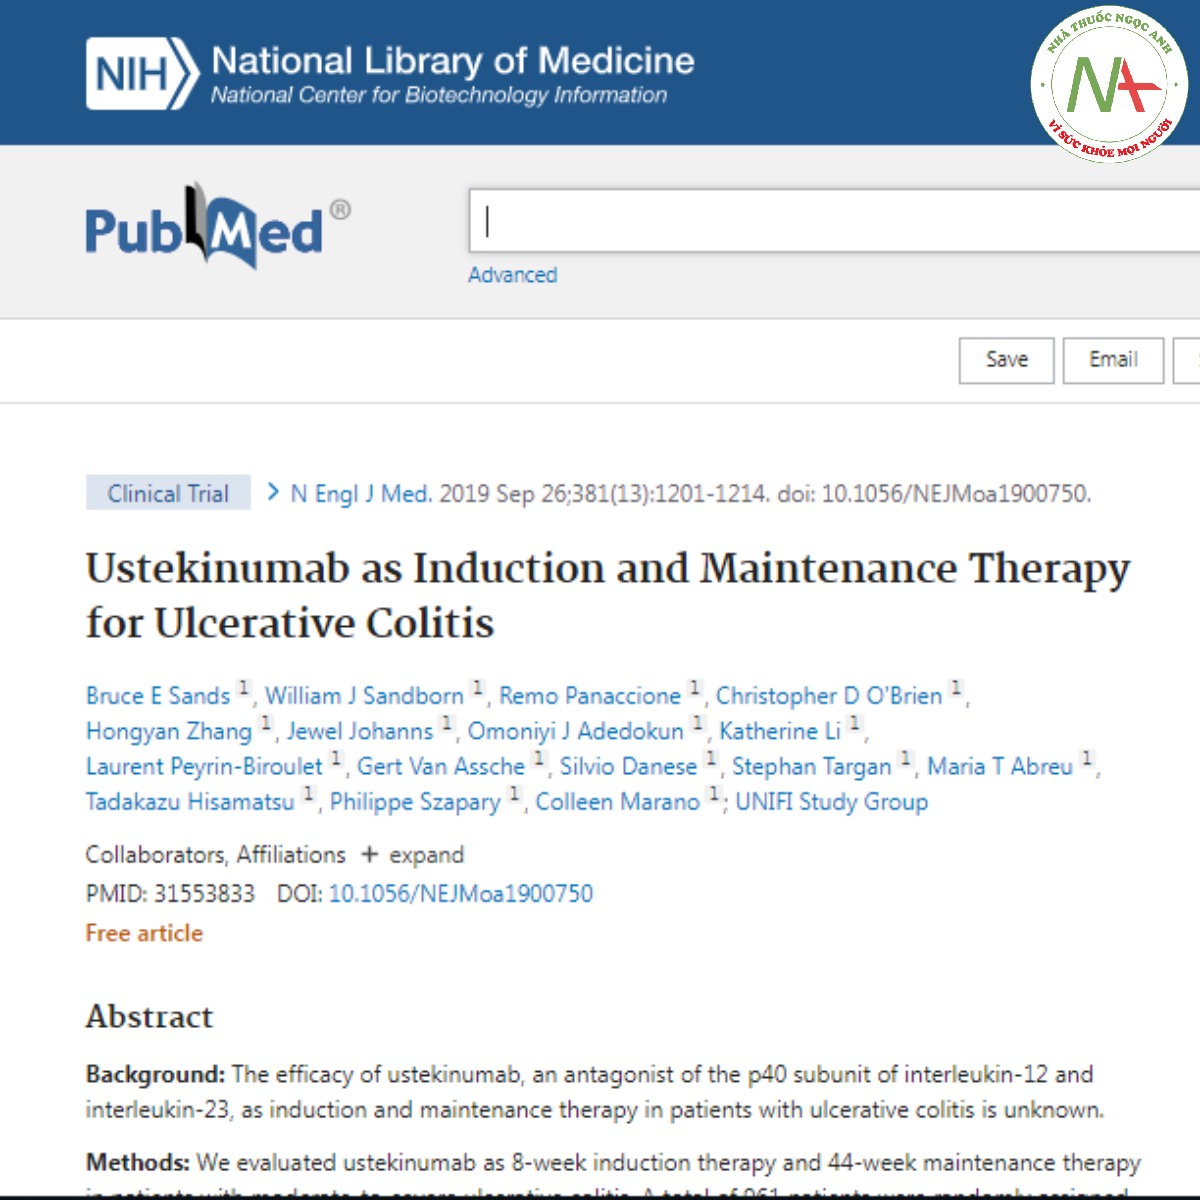 Ustekinumab as Induction and Maintenance Therapy for Ulcerative Colitis